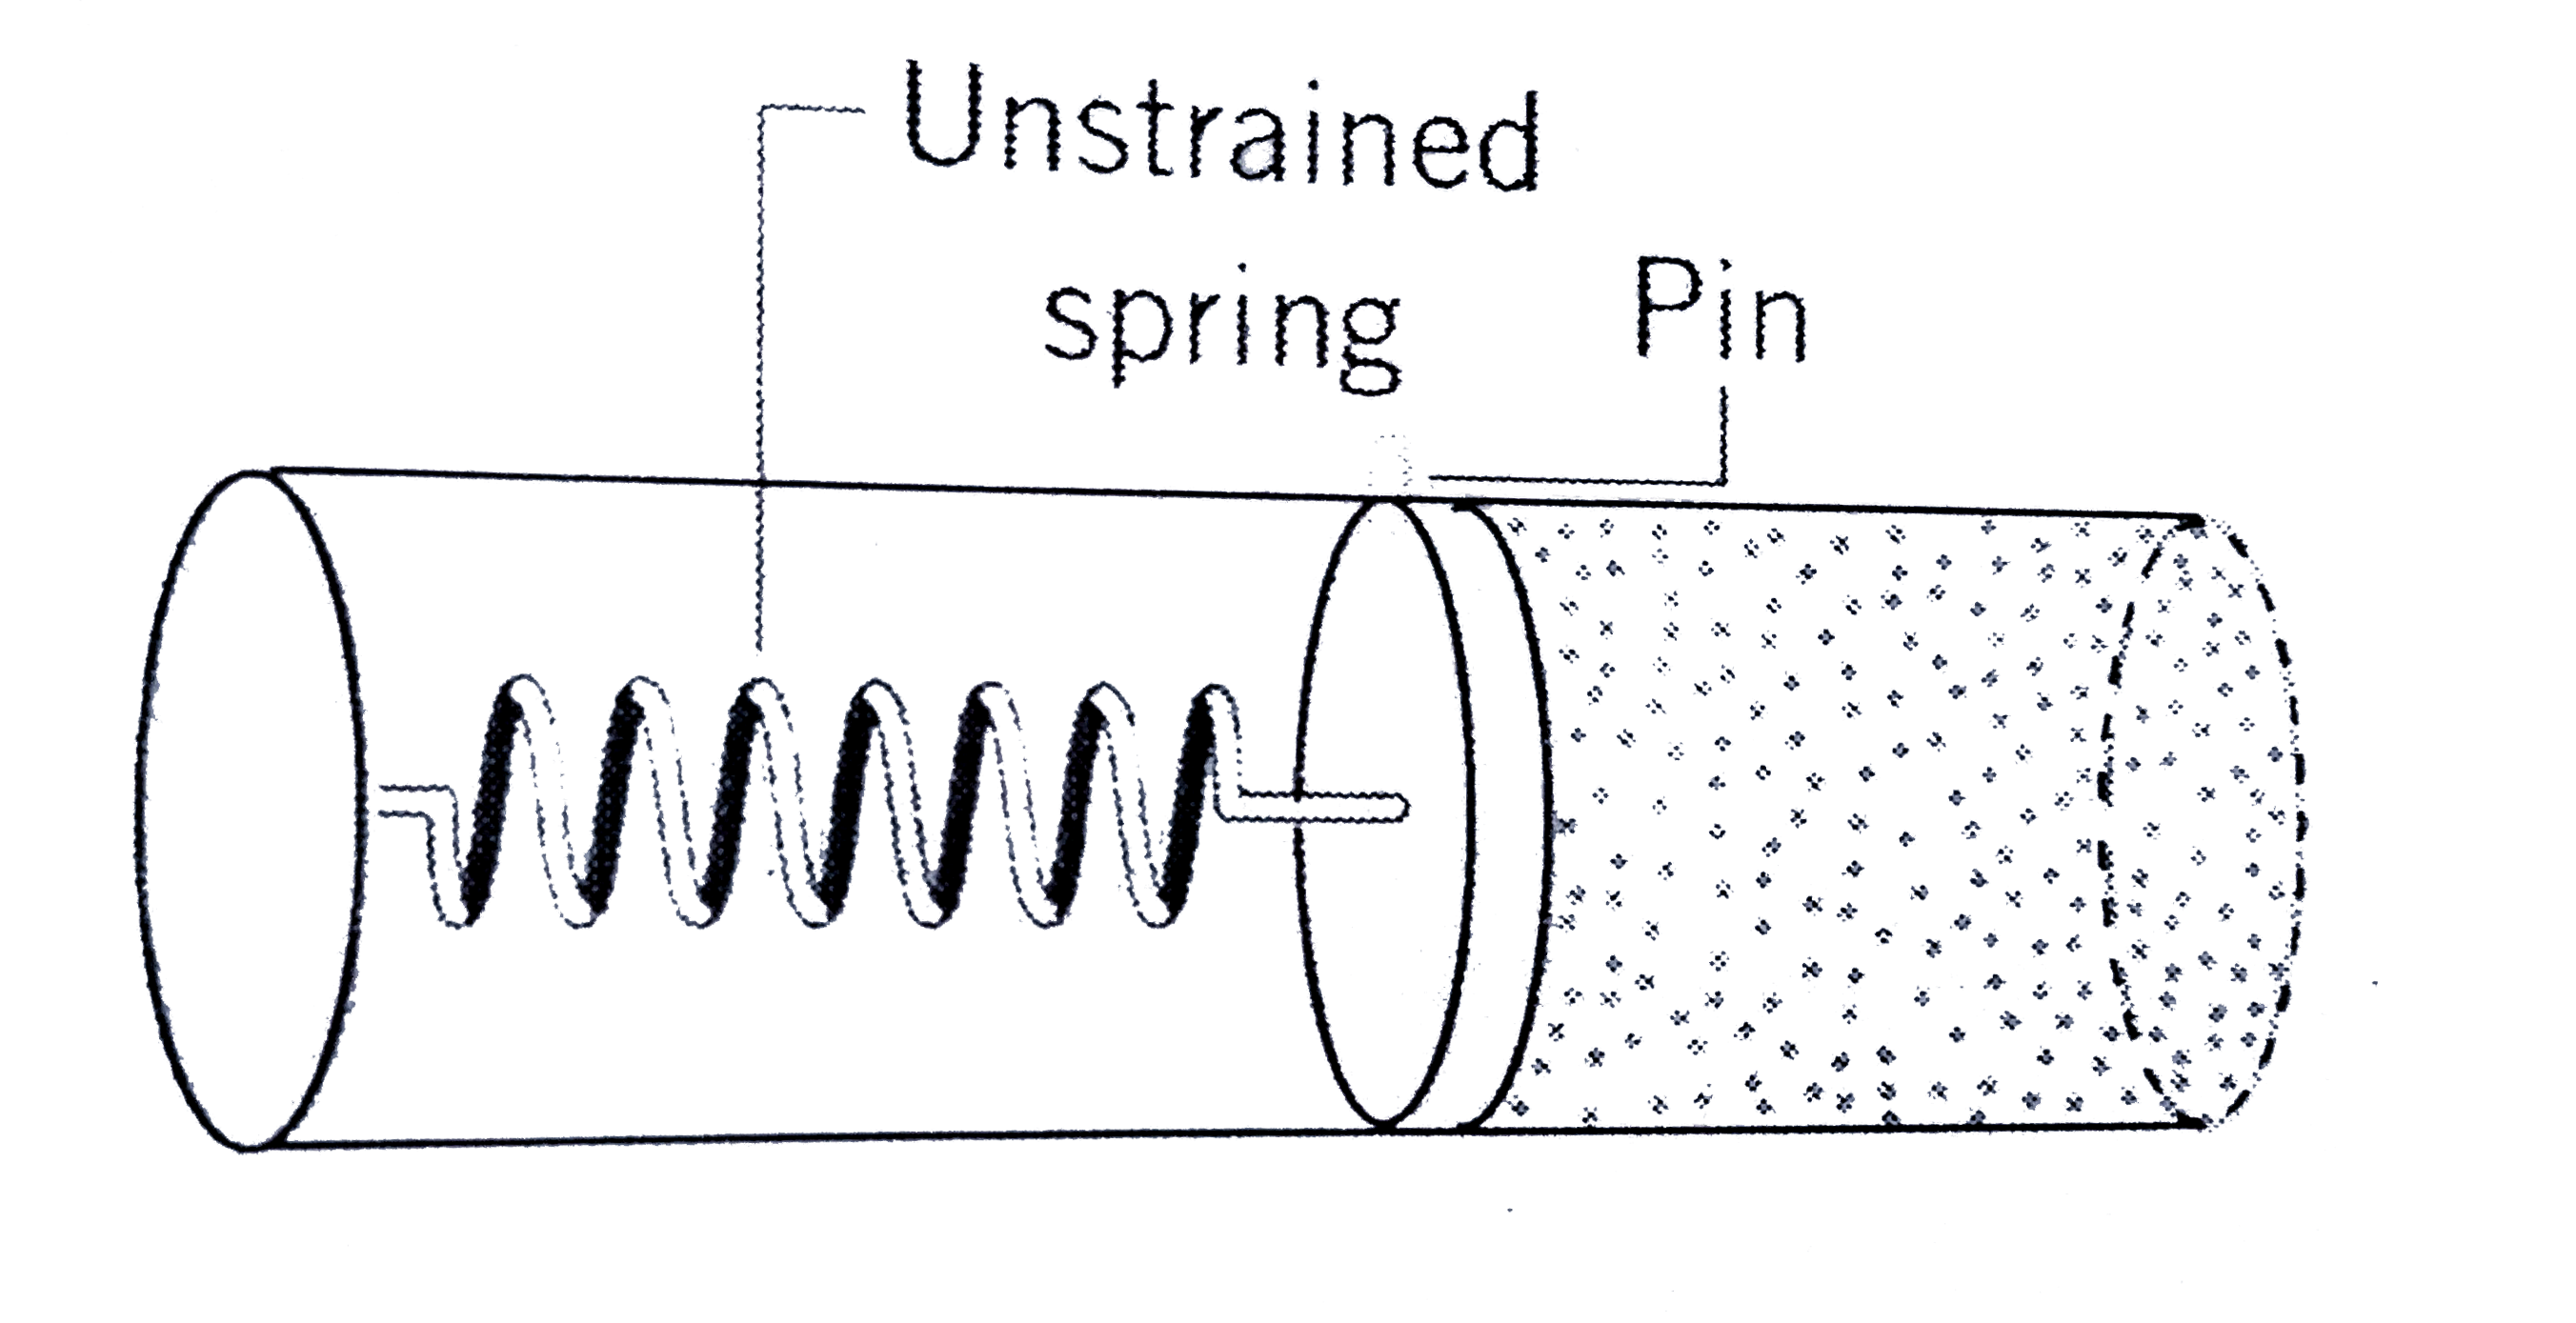 A gas fills the right portion of a horizontal cylinder whose radius is 5.00 cm. The initial pressure of the gas is 101 kPa. A frictionless movable piston separates the gas from the left portion of the cylinder, which is evacuated and contains an ideal spring, as the drawing shows. The piston is initially unstrained, and the length of the gas-filled portion is 20.0 cm. Wheen the pin is removed and the gas is allowed to expand, the length of the gas-filled chamber doubles when it finally reaches equilibrium. The initial and final temperatures are equal. Determine the spring constant of the spring.